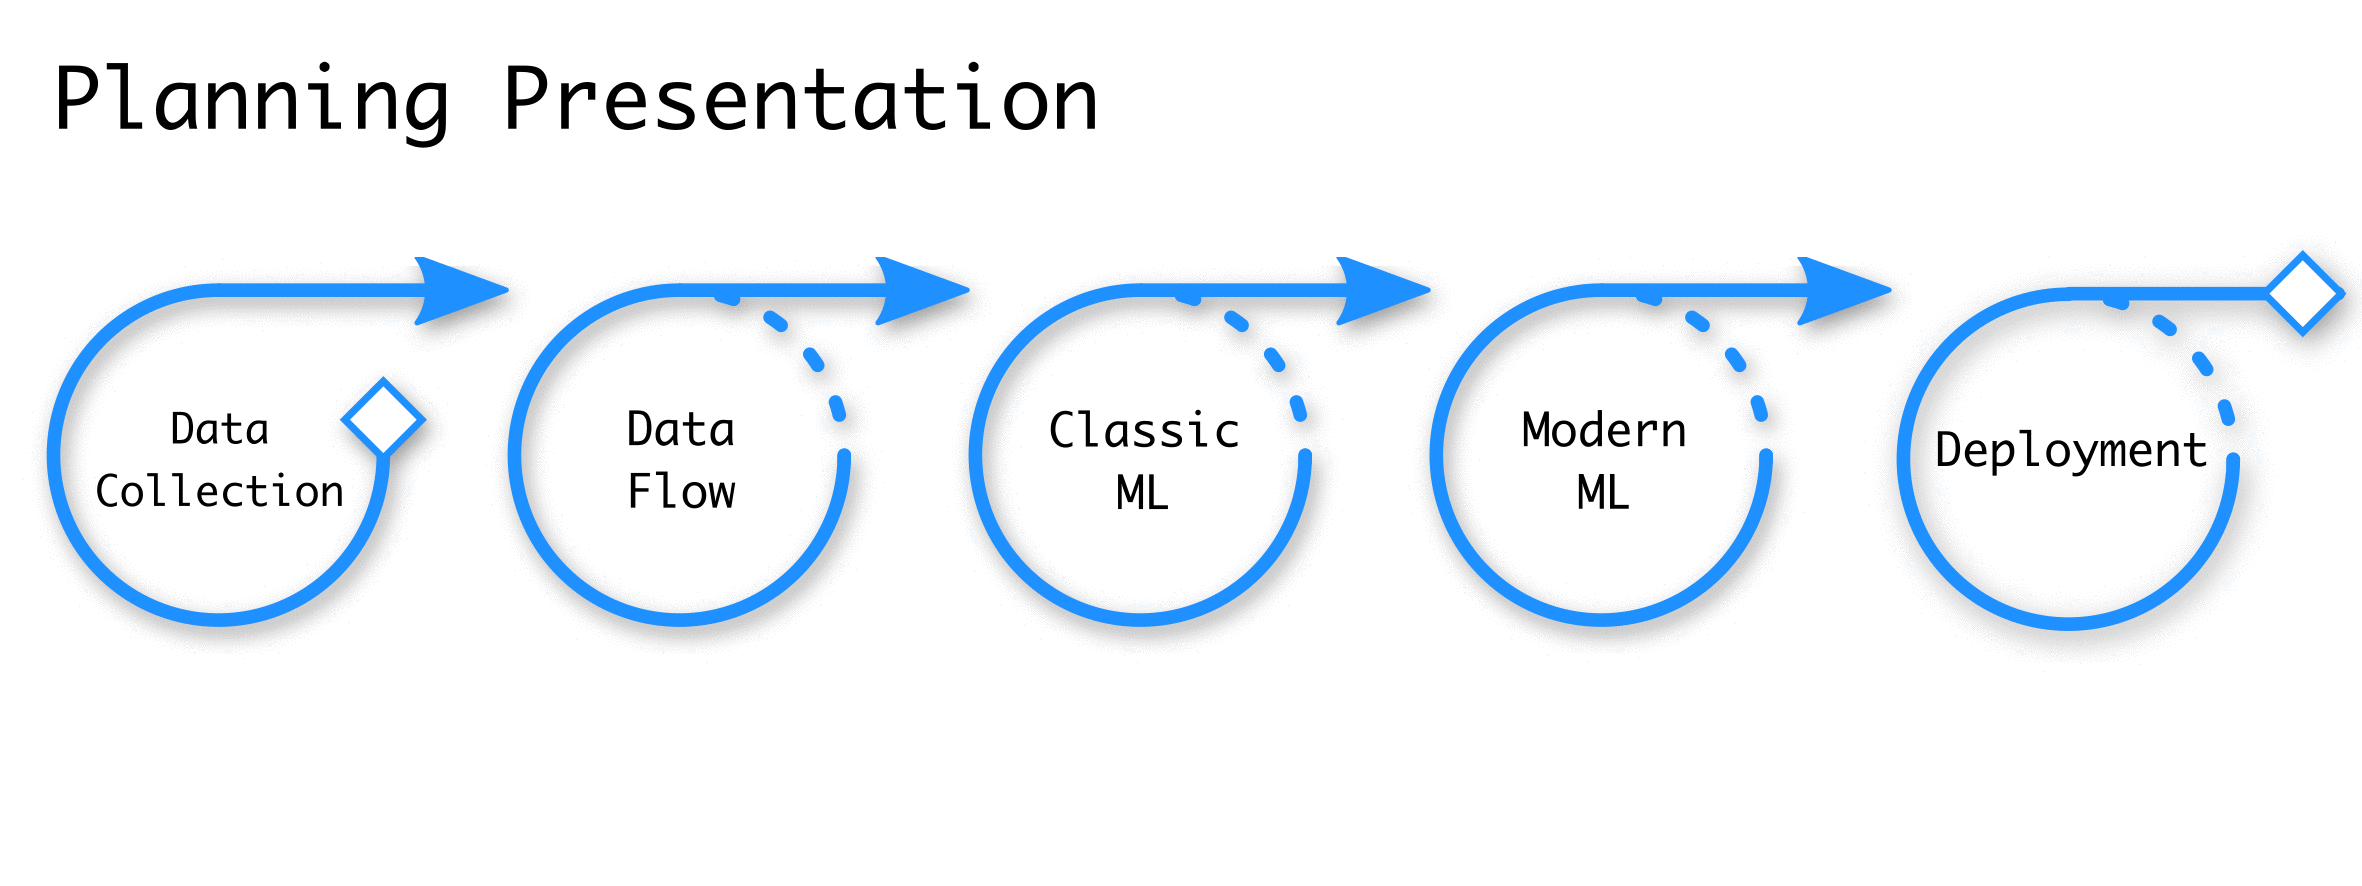 People with different views on ML will hold different expectations for the path to success. There are many factors (some unknown at project outset) that affect the work required. Often, the most important factors are the difficulty of the problem (e.g. pixel-wise image segmentation is more difficult than image classification), the quantity and quality of training data, and the desired performance and reliability of the deployed model.